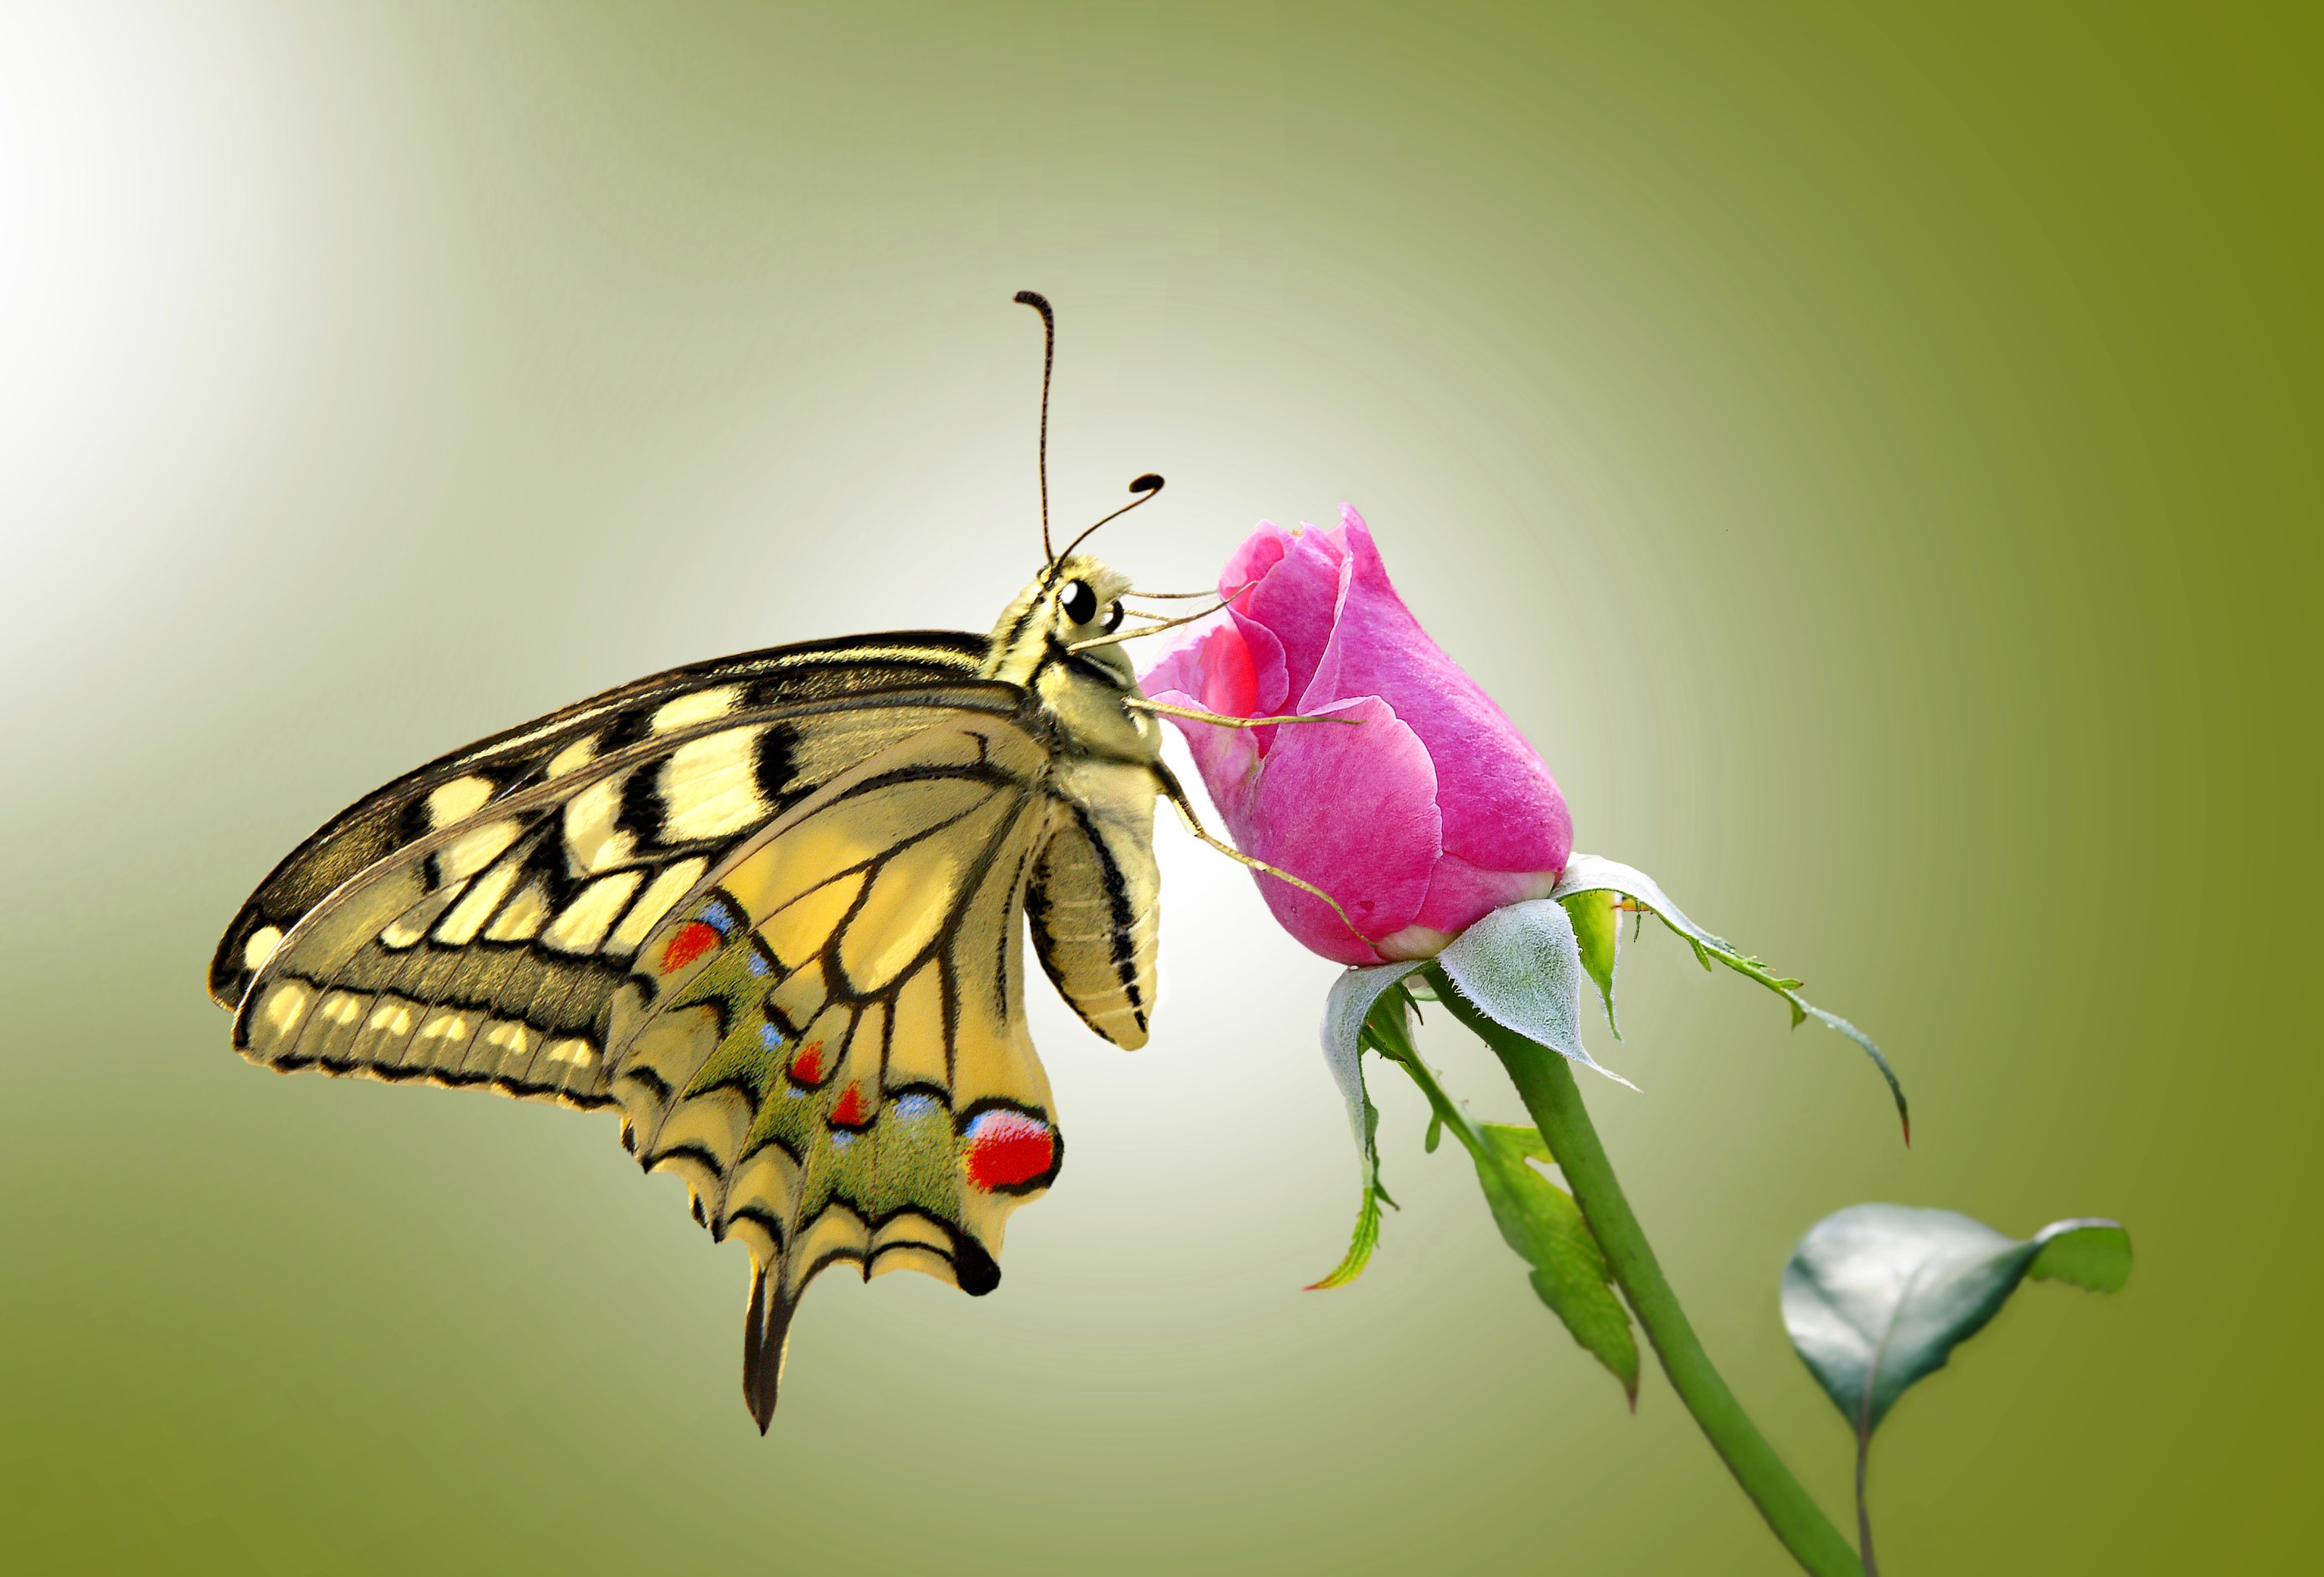 butterfly, insects, insect, flower, animal, swallowtail butterfly, nature